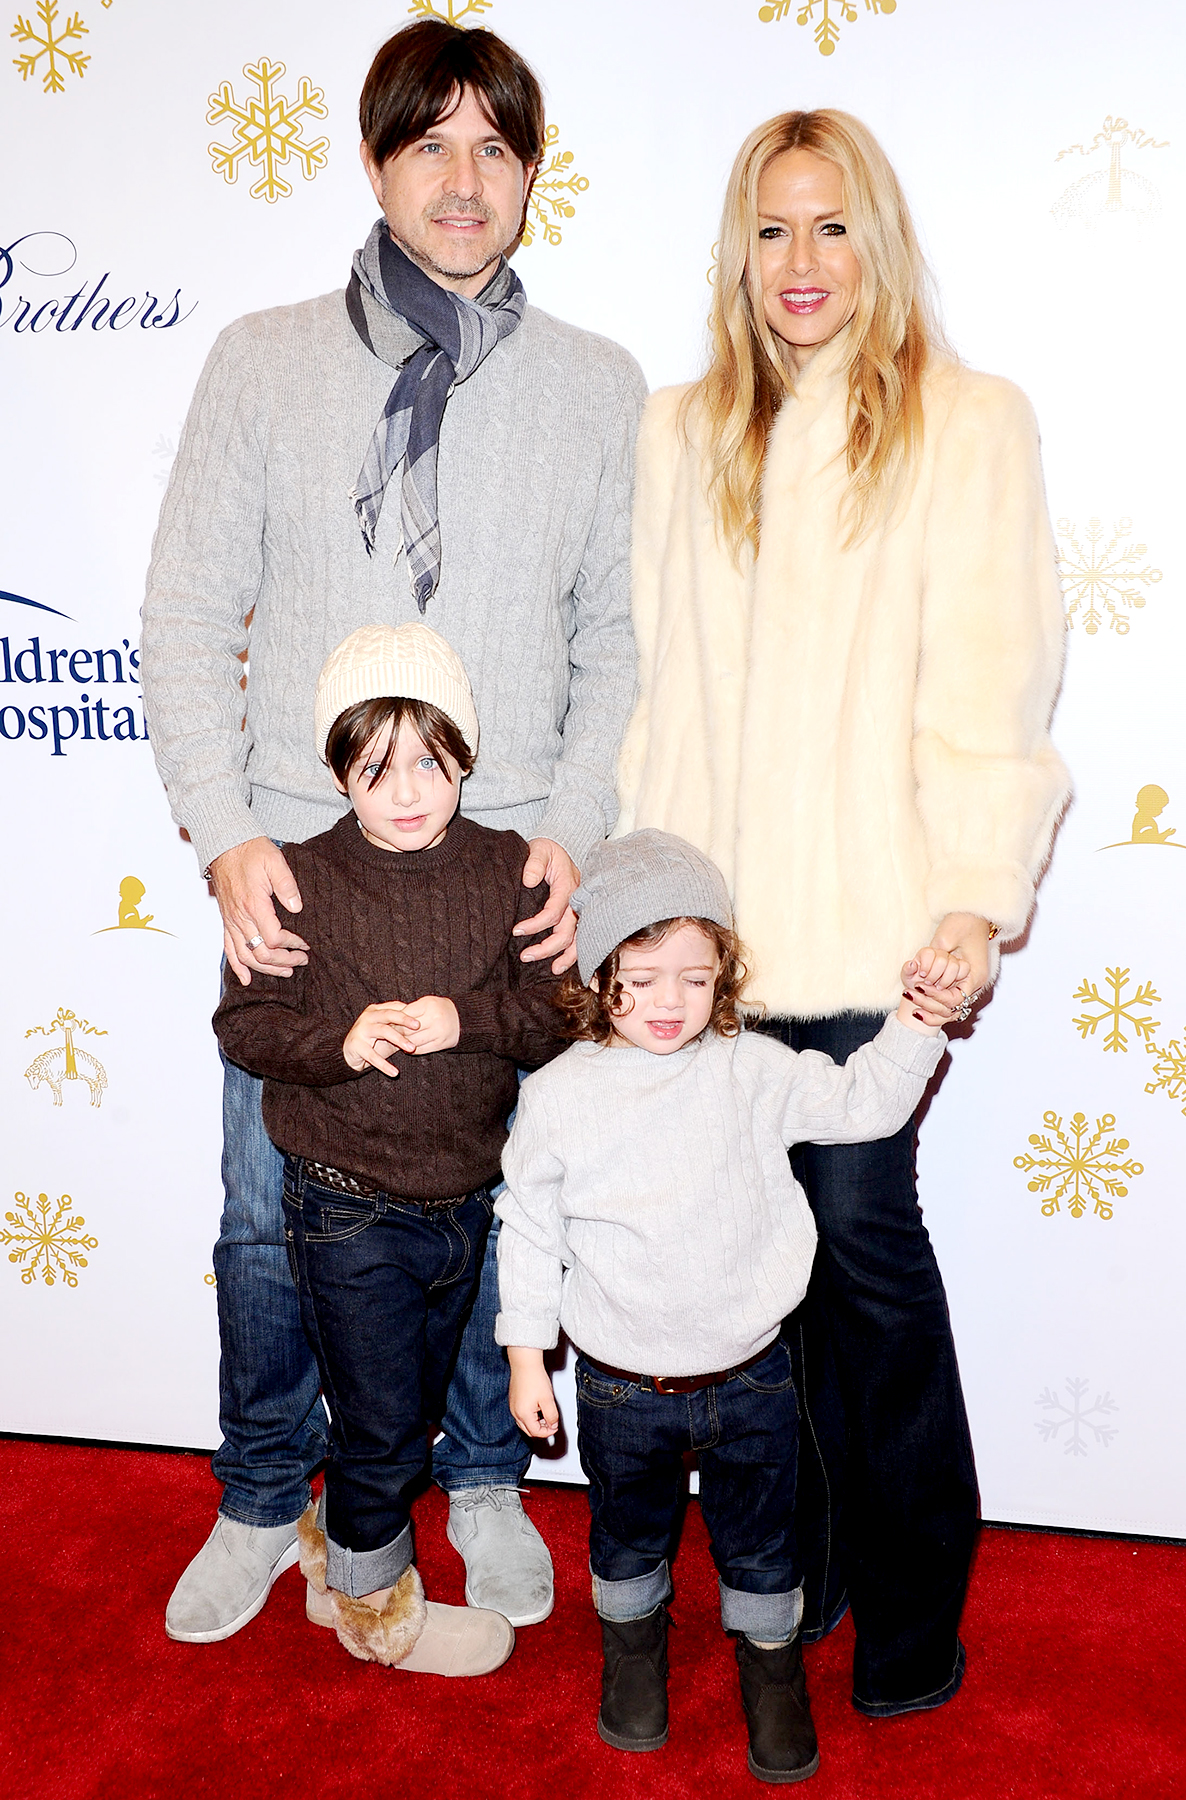 Rachel Zoe on Being a Mom of Boys: 'I'm Surrounded by Testosterone